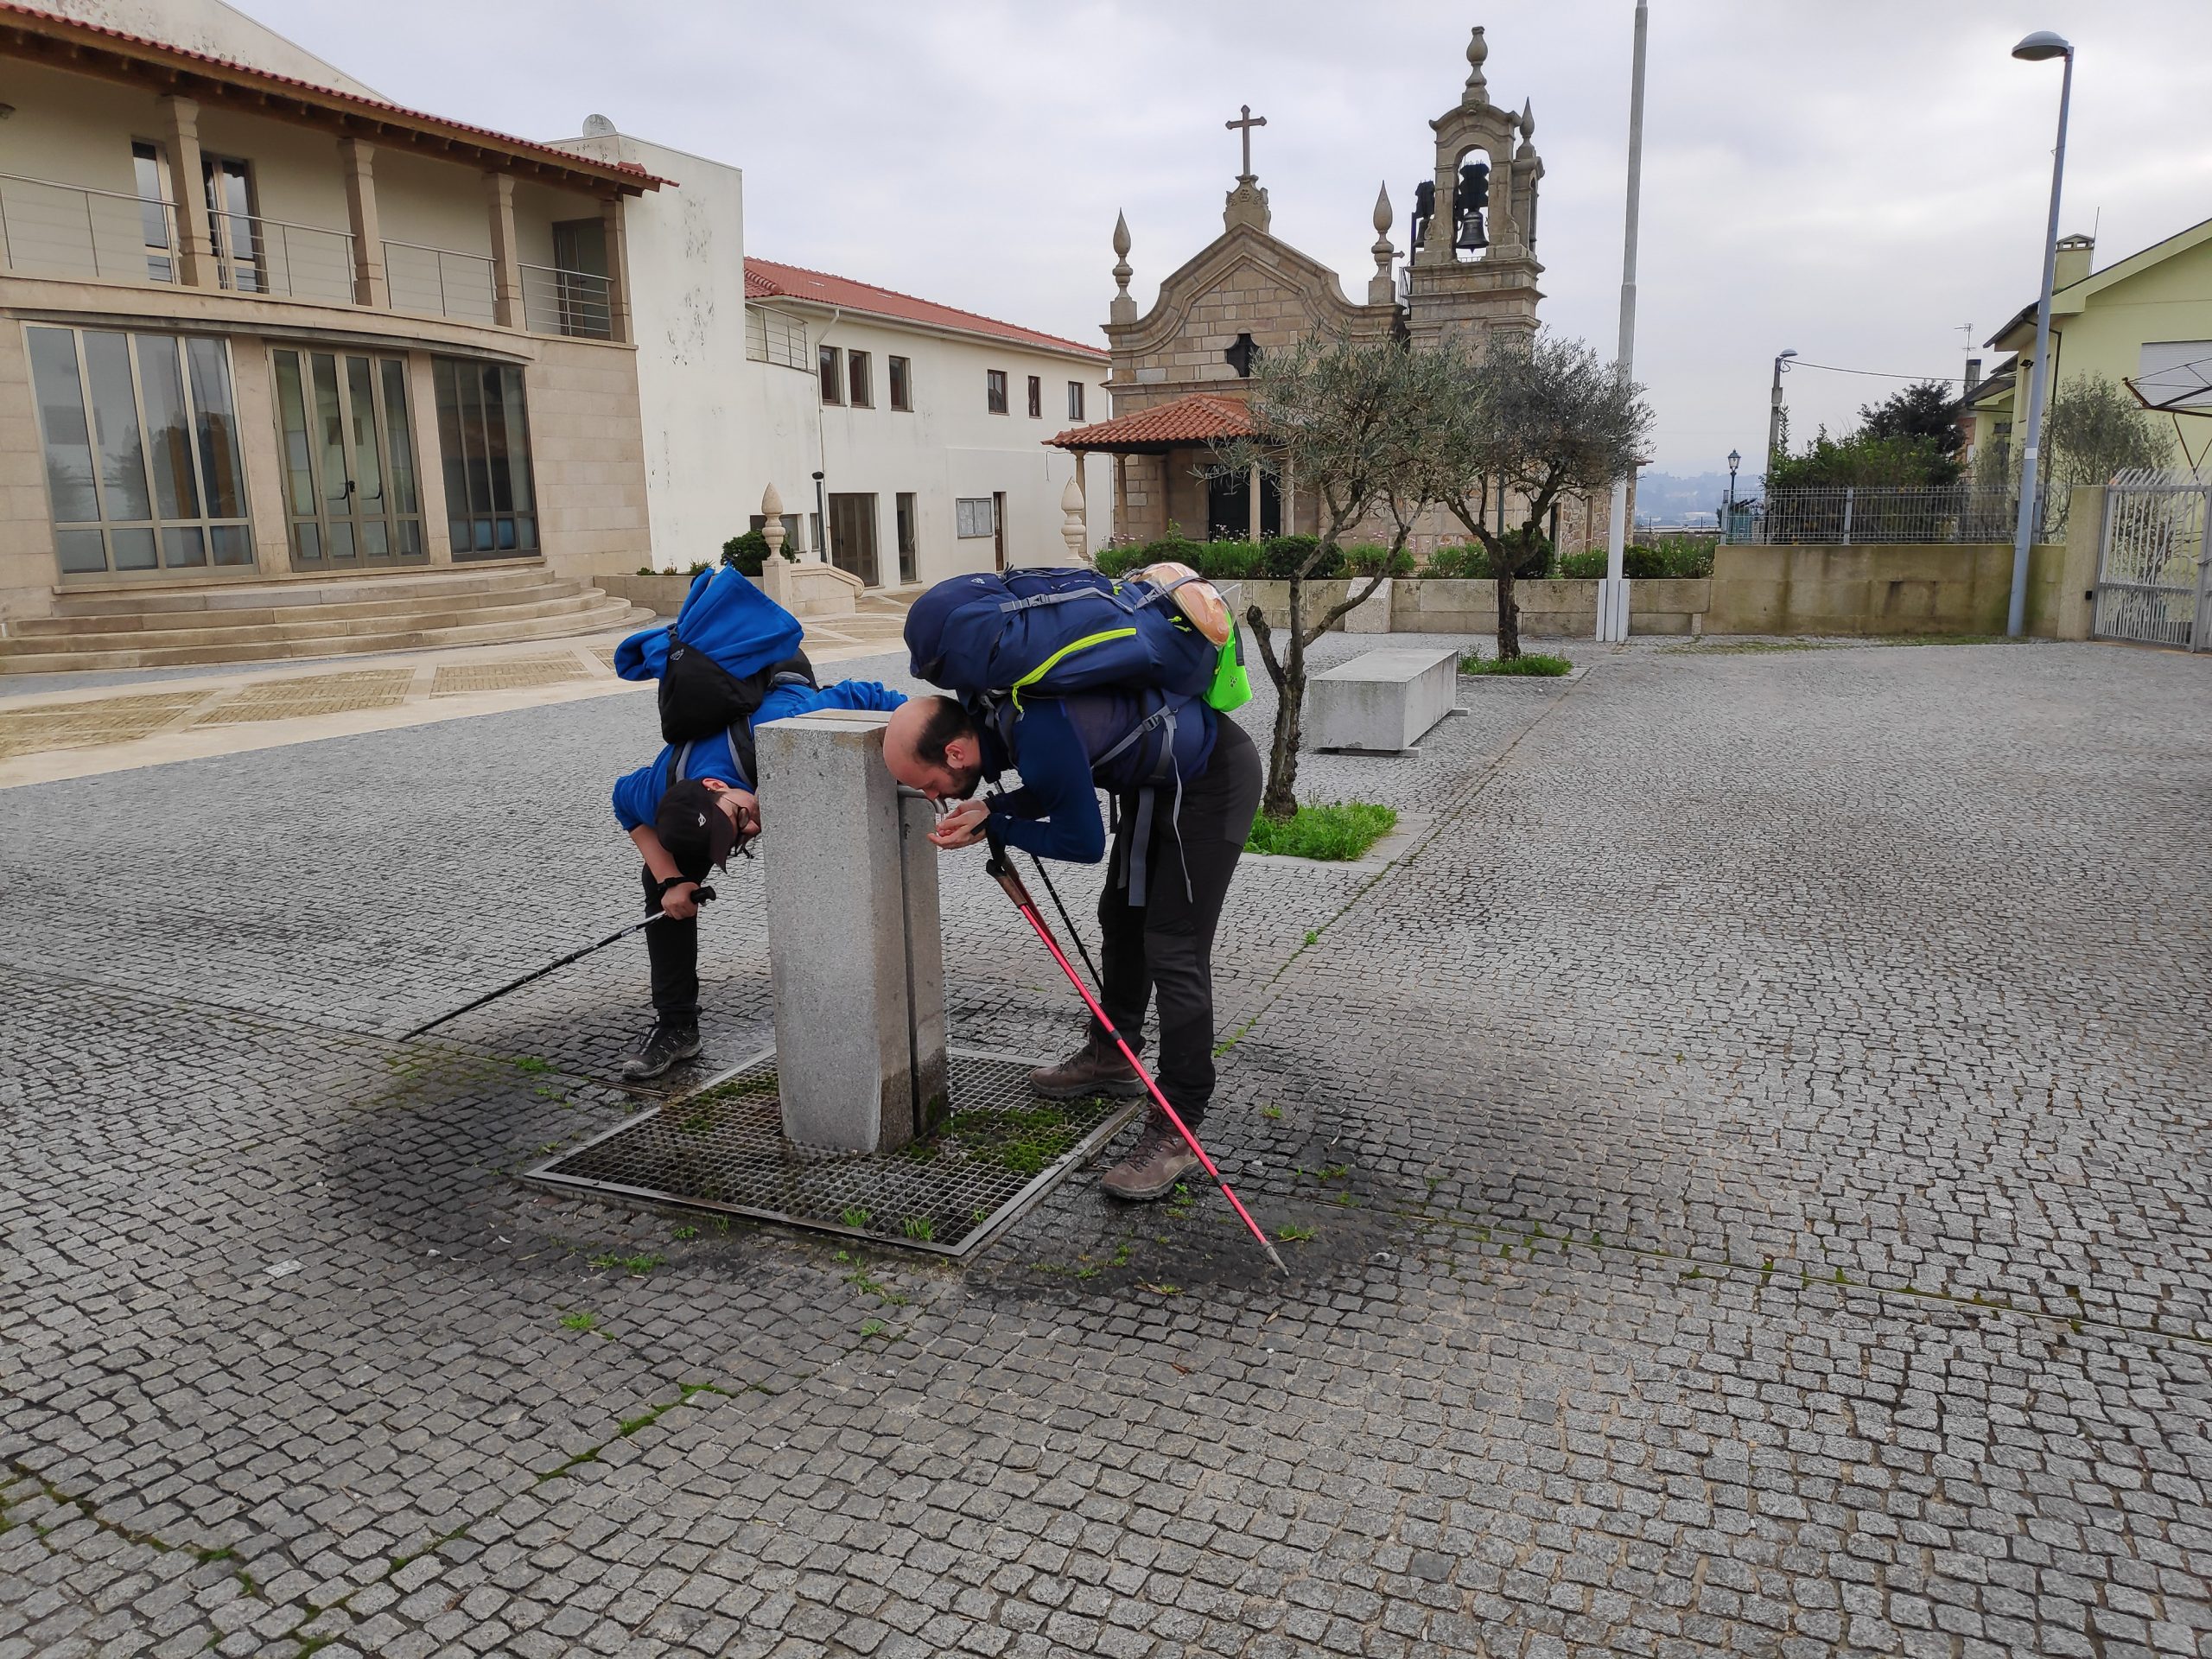 From time to time, we found drinking water fountains, which we took advantage of. It would not be possible to carry enough water for whole day with us. 